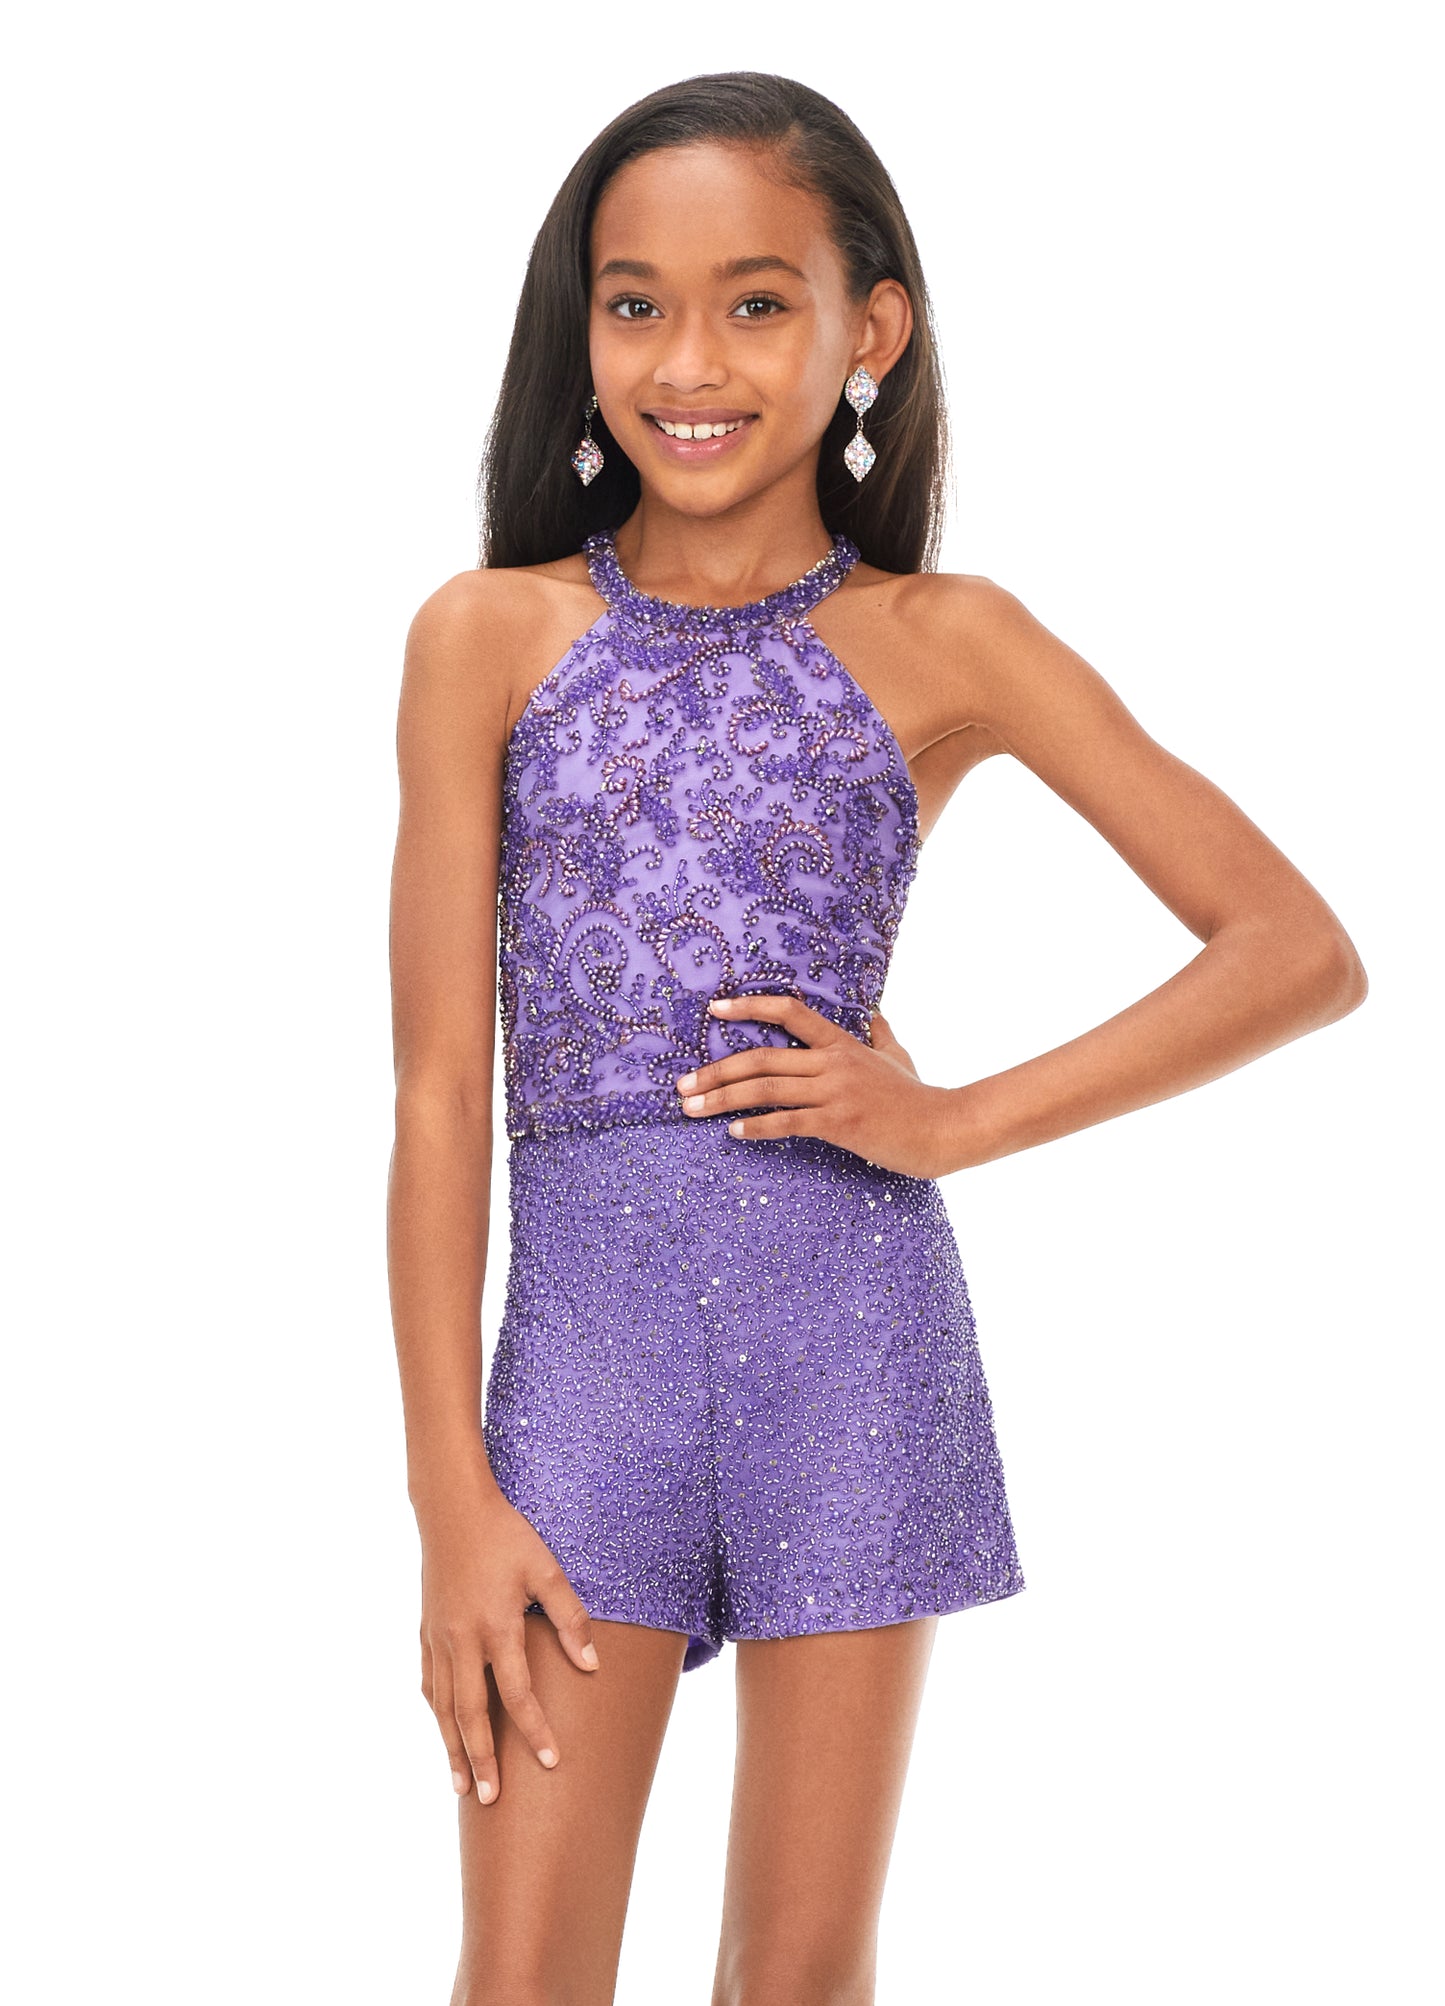 Ashley Lauren Kids 8187 Kids Beaded Halter Romper  This super fun kids halter style romper with ornately beaded bodice gives way to beaded shorts.